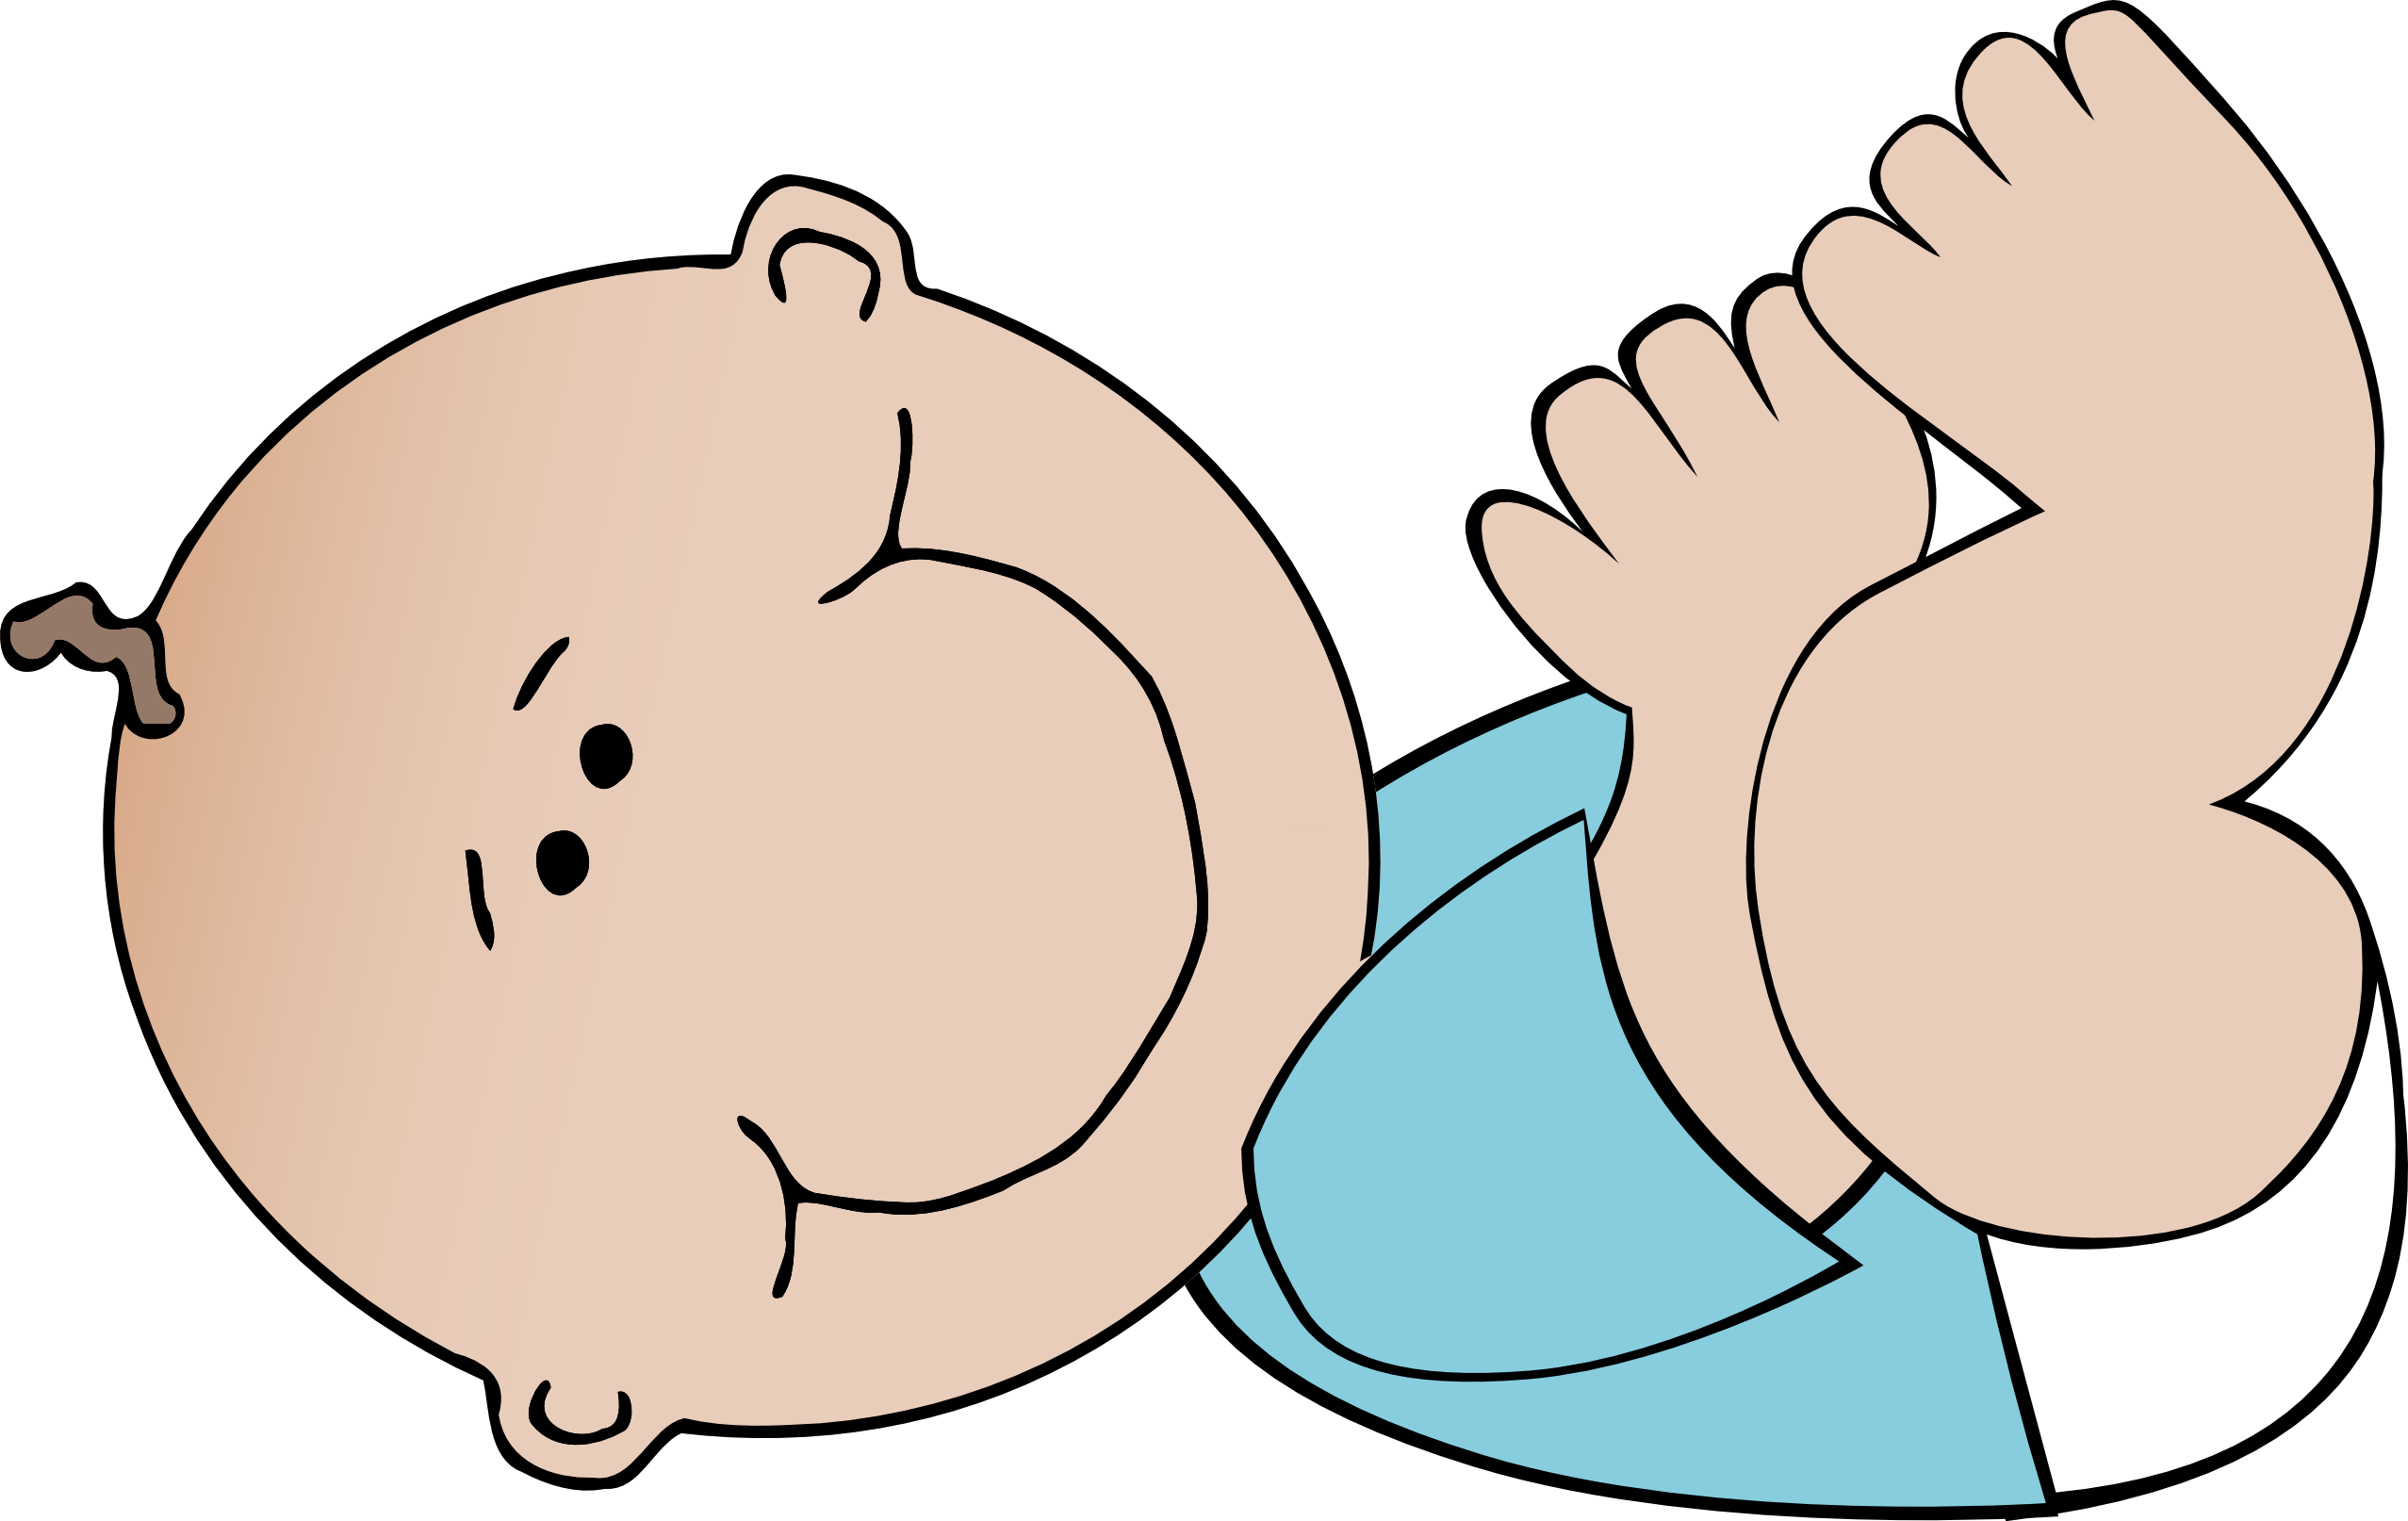 Cartoon Baby Boy PNG Images Transparent Background | PNG Play